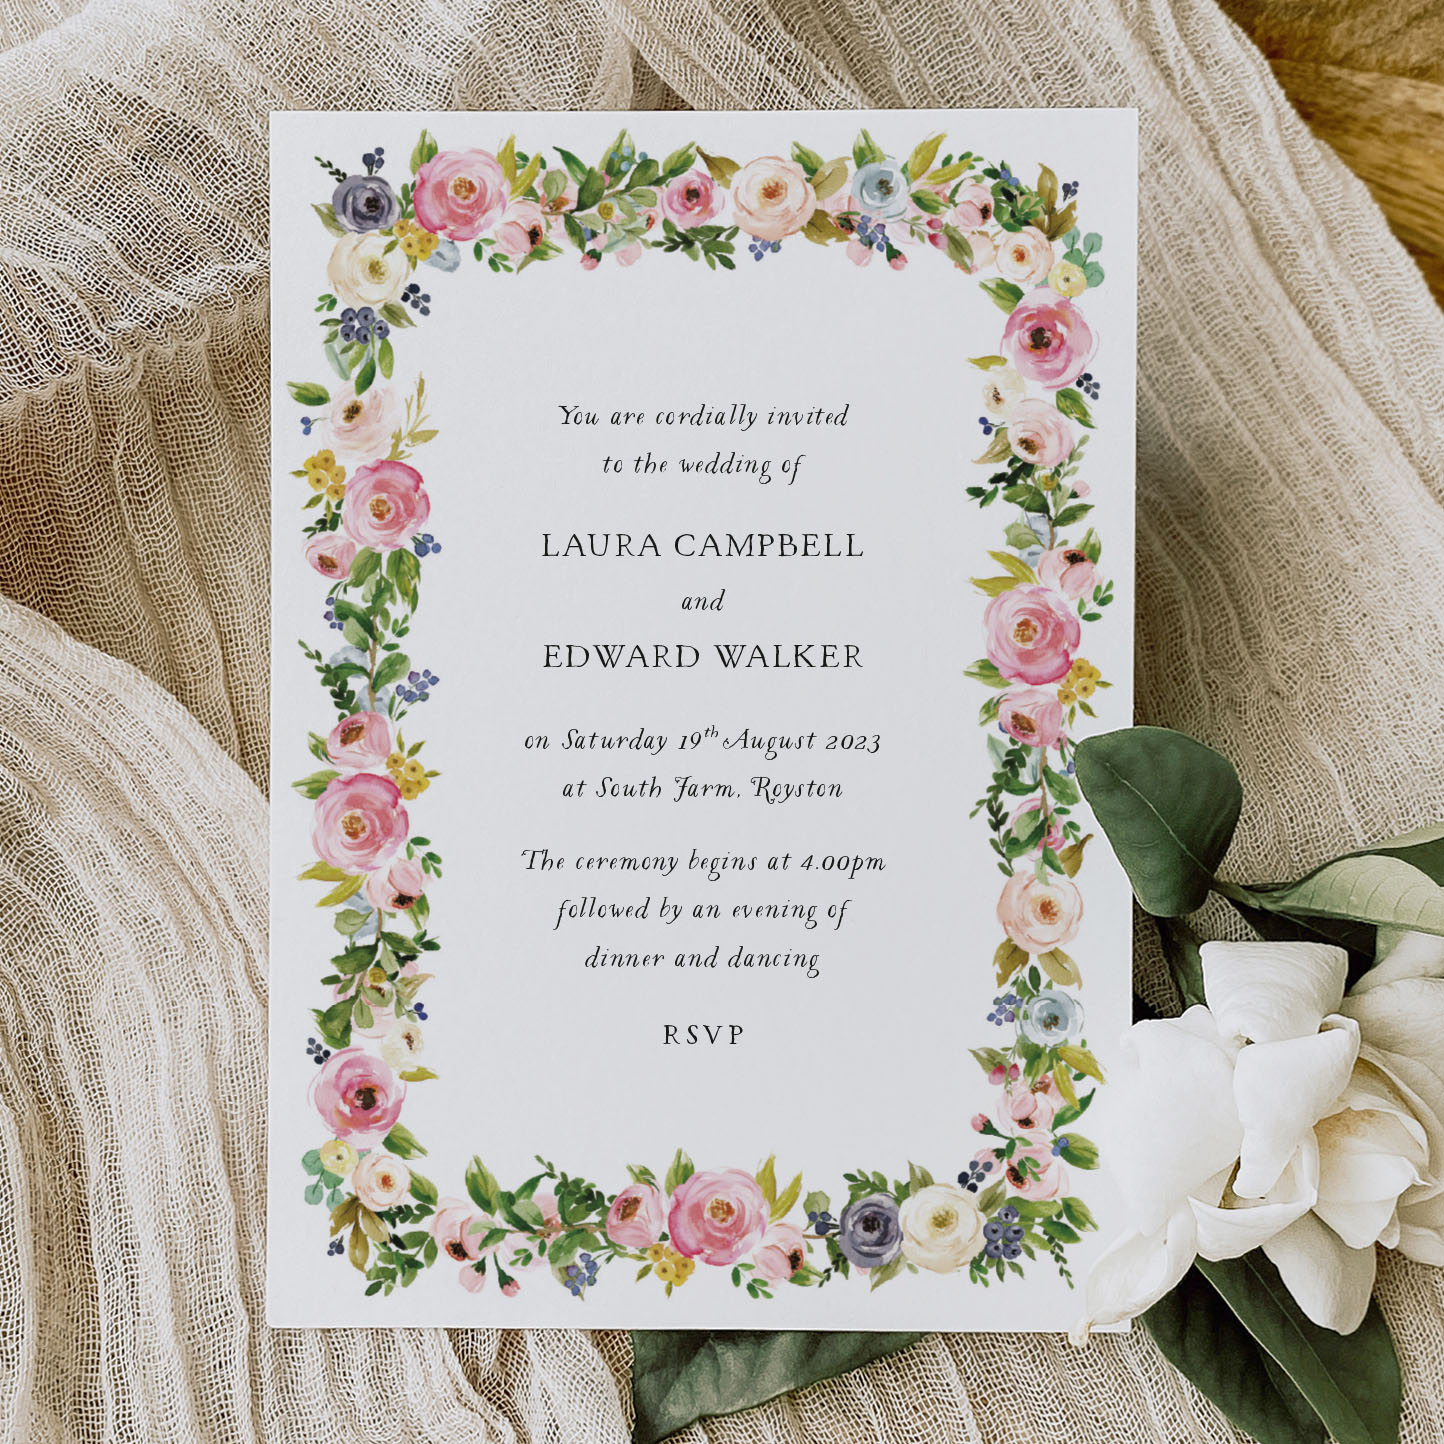 Showing Garland - Rustic Floral wedding stationery colleection on a wooden board